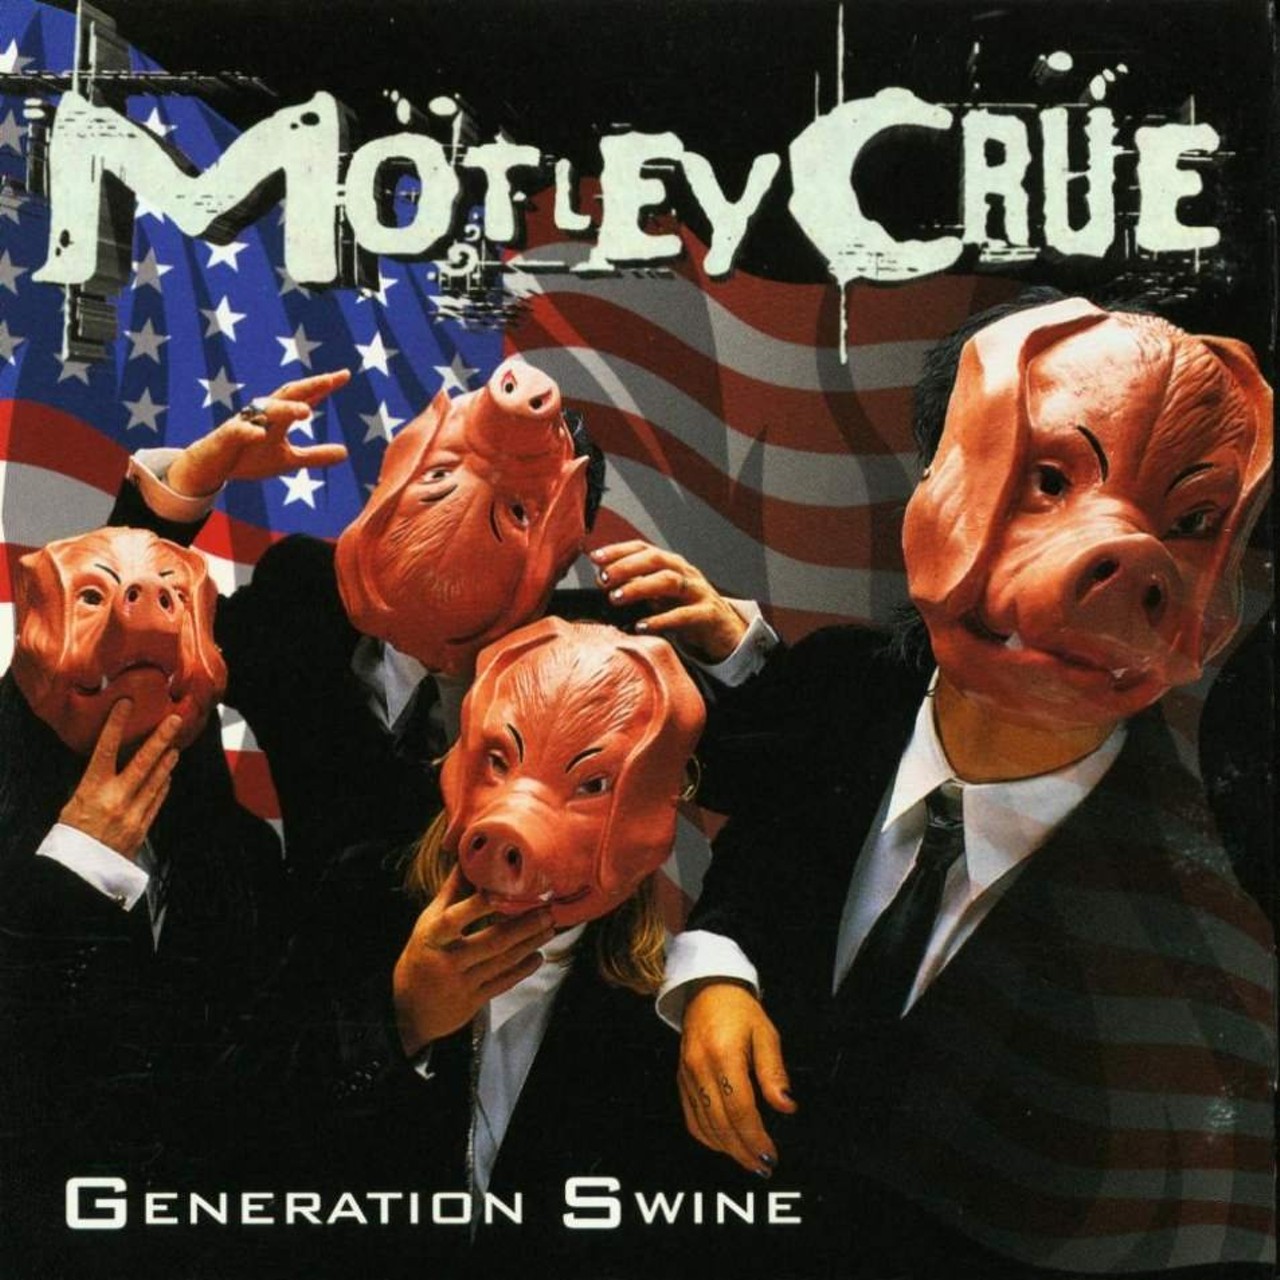 M&ouml;tley Cr&uuml;e - Generation Swine (1997)
Generation Swine's most notable quality was probably the return of Vince Neil as the band's frontman, but despite the reunion of classic M&ouml;tley Cr&uuml;e, the record wasn't well-received by fans or critics. While the cover might lead one to believe it's a political record, the songs stood true to M&ouml;tley Cr&uuml;e pedigree, concentrating mostly on drugs, love and prostitution.